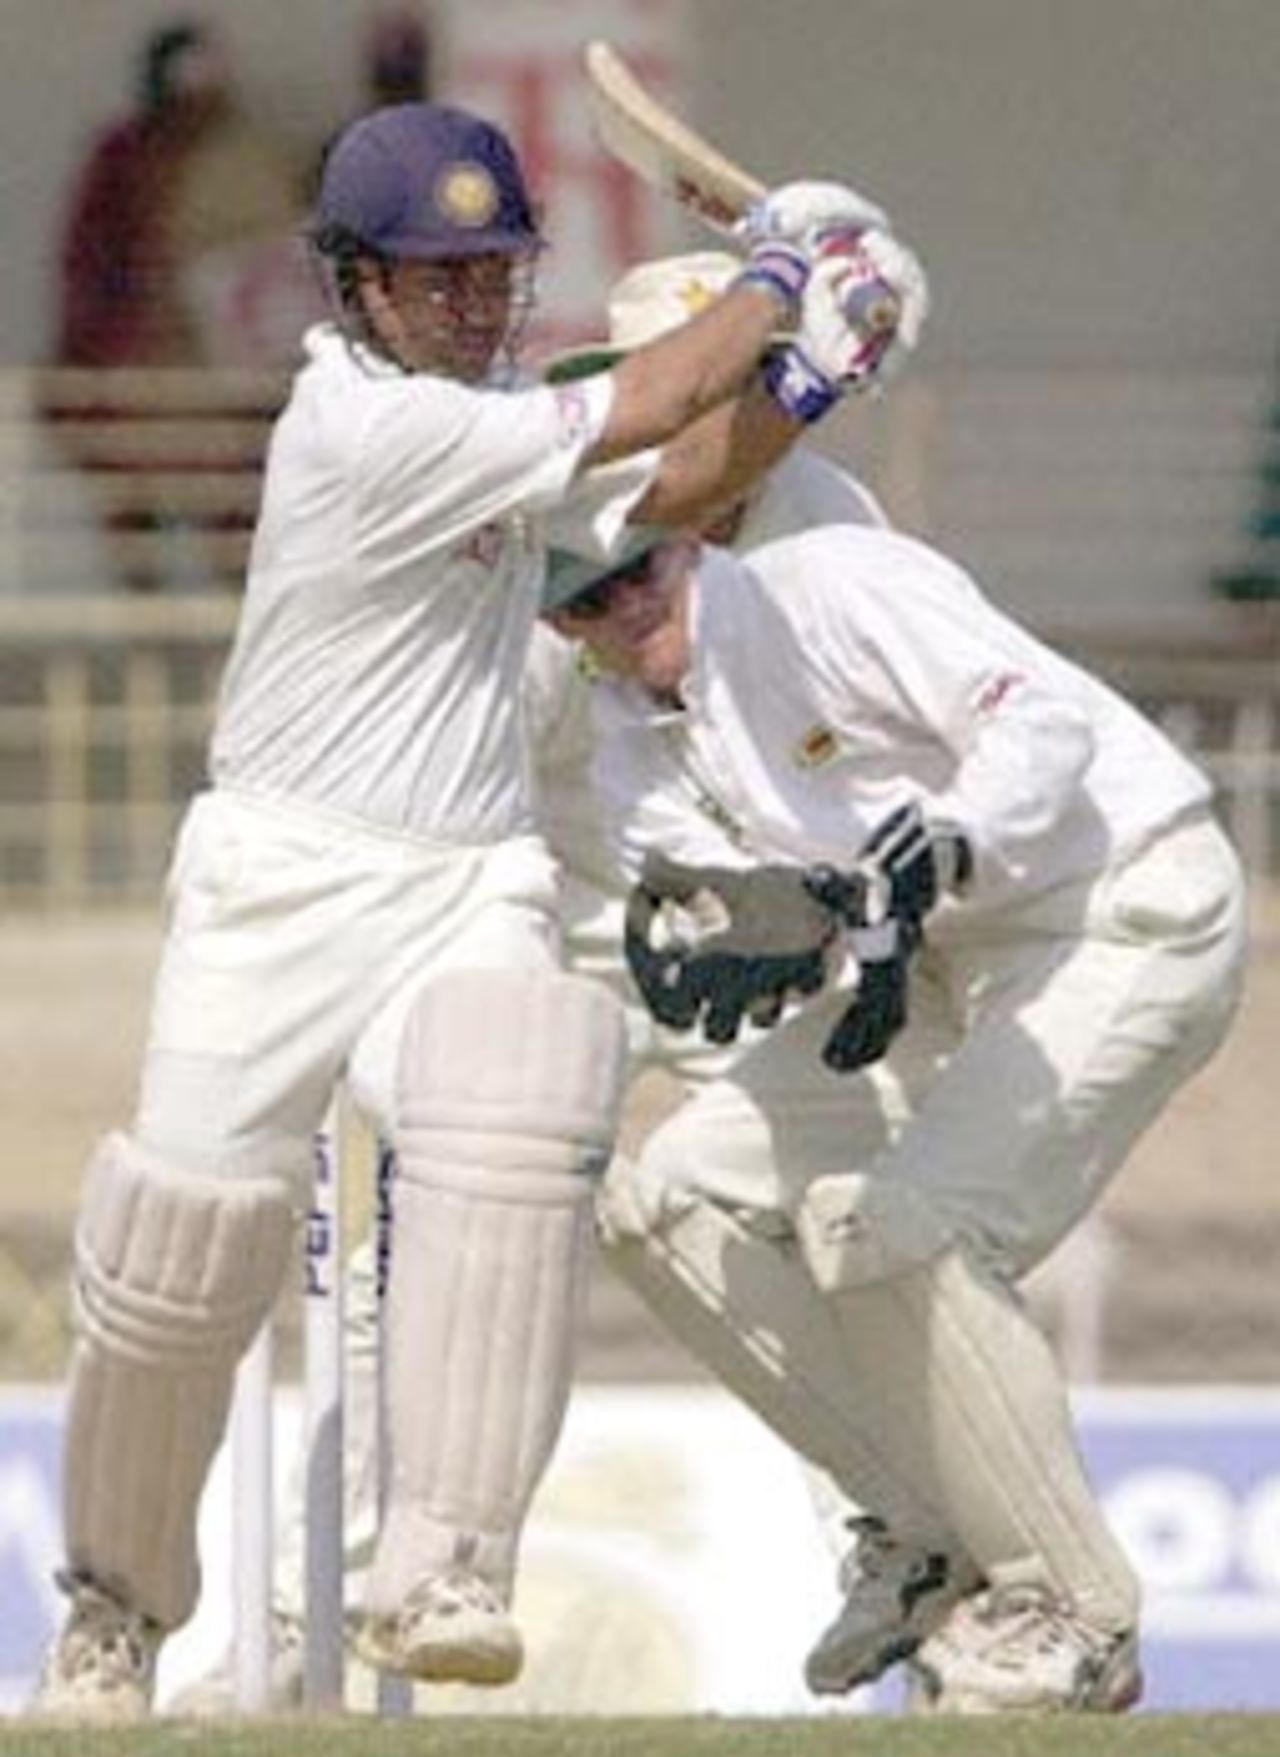 Indian batsman Sachin Tendulkar pulls a delivery from Zimbabwean spinner Brian Murphy (not in picture) as Zimbabwe wicket keeper Andy Flower (R) looks on during the second day of the second test match between India and Zimbabwe 26 November 2000 in Nagpur. Tendulkar was unbeaten on 142 runs by lunch.